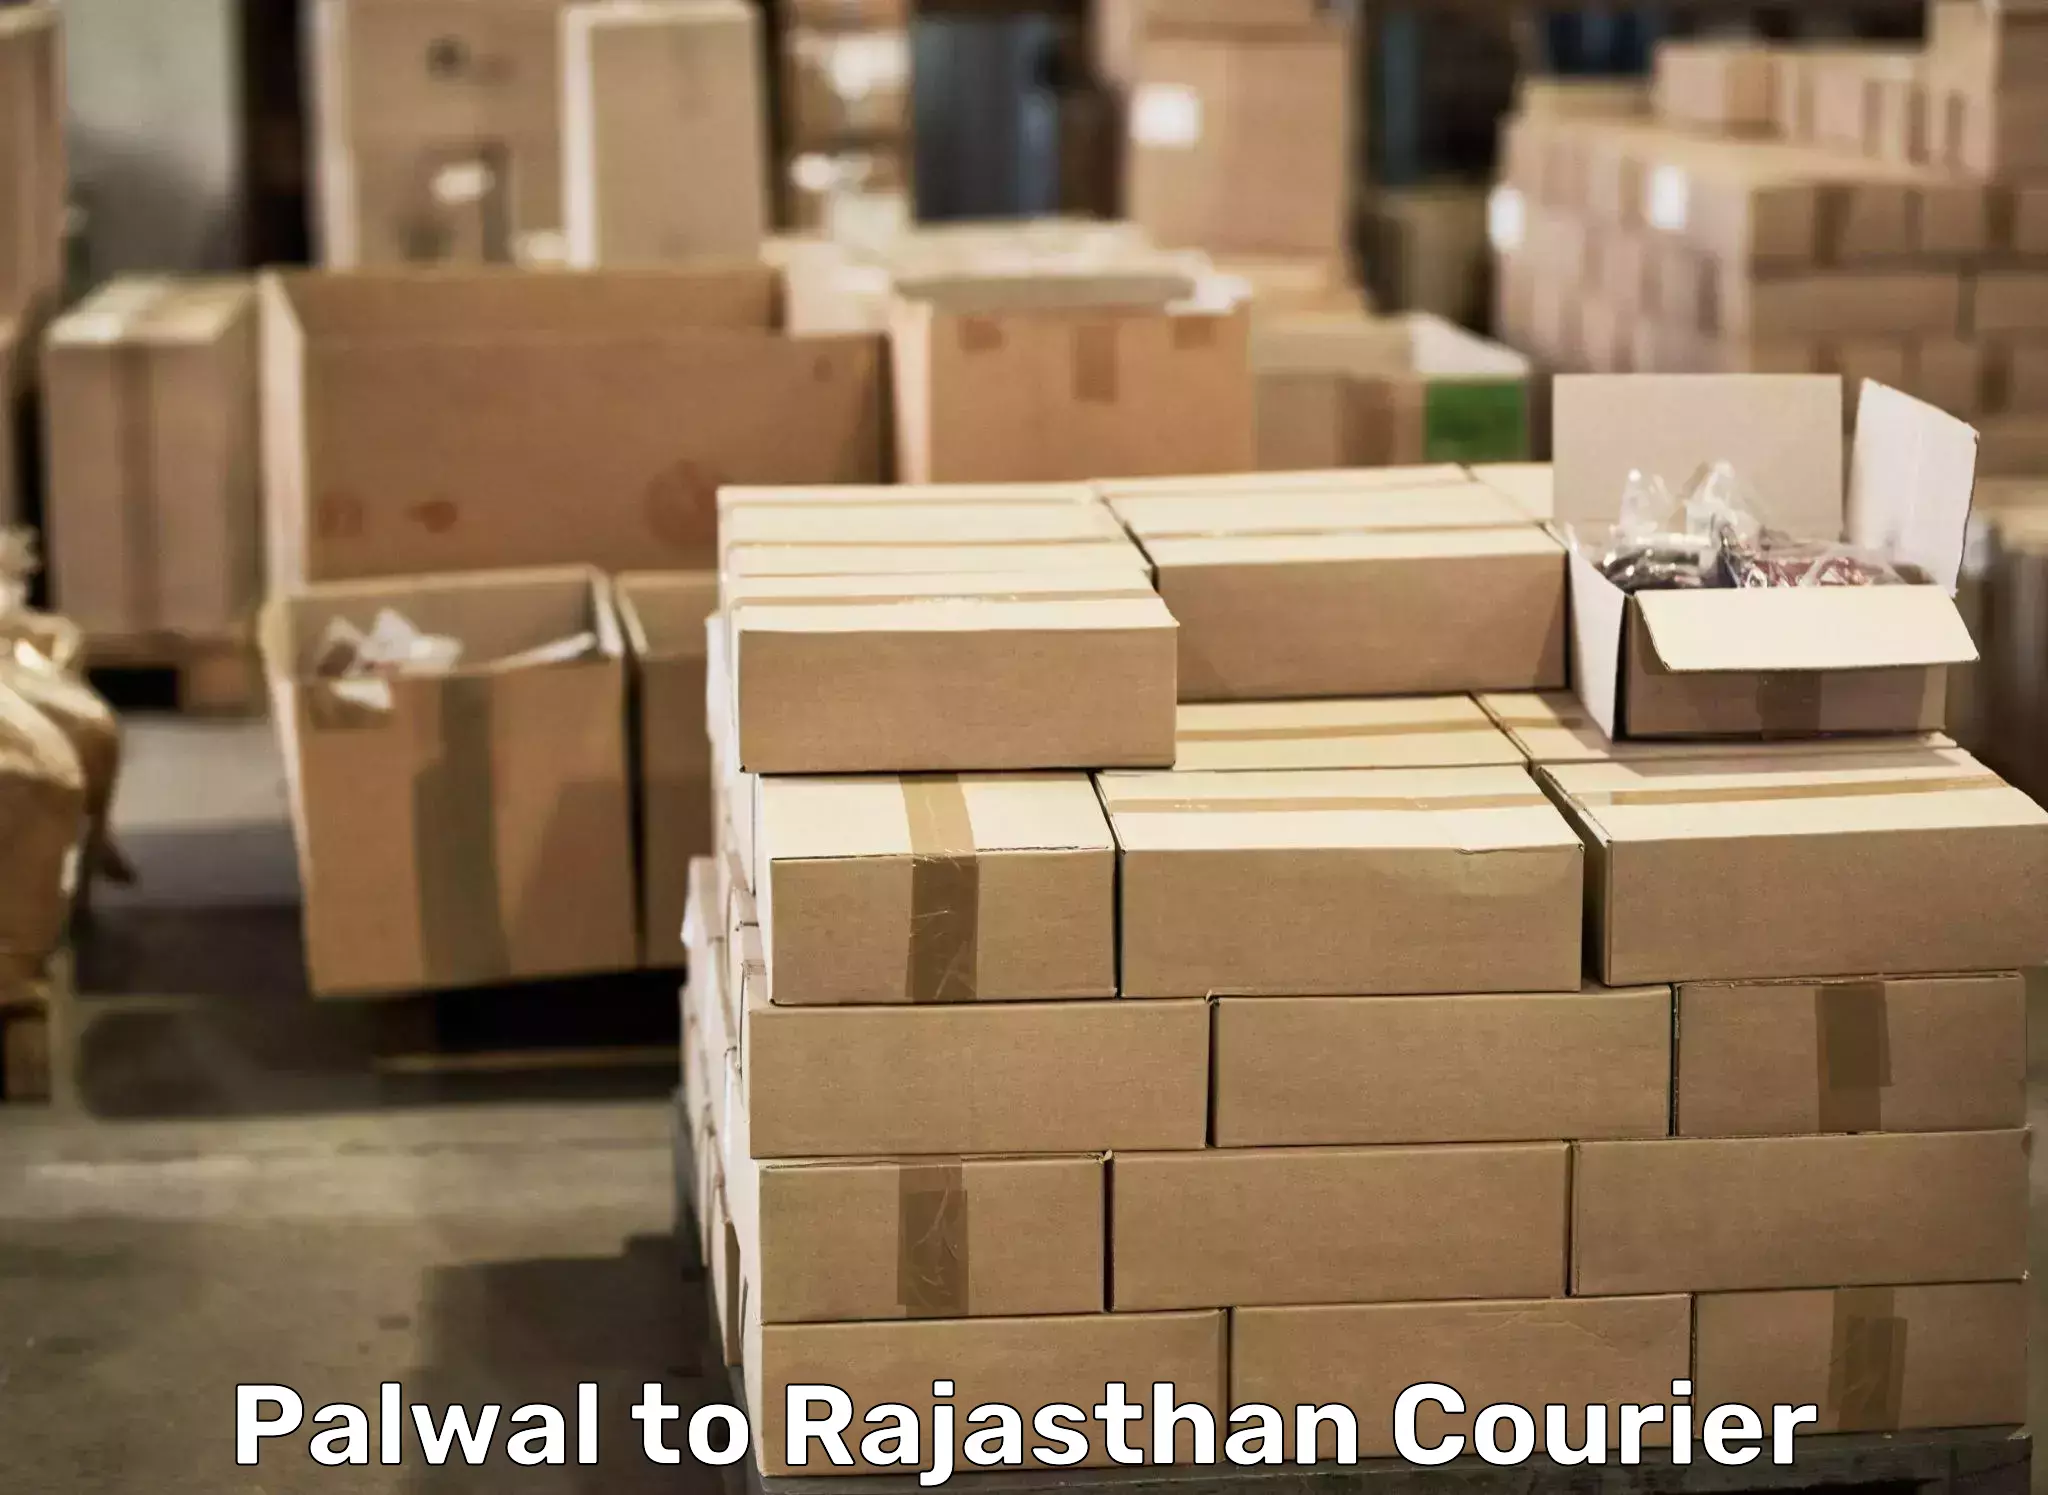 Furniture delivery service Palwal to Sawai Madhopur